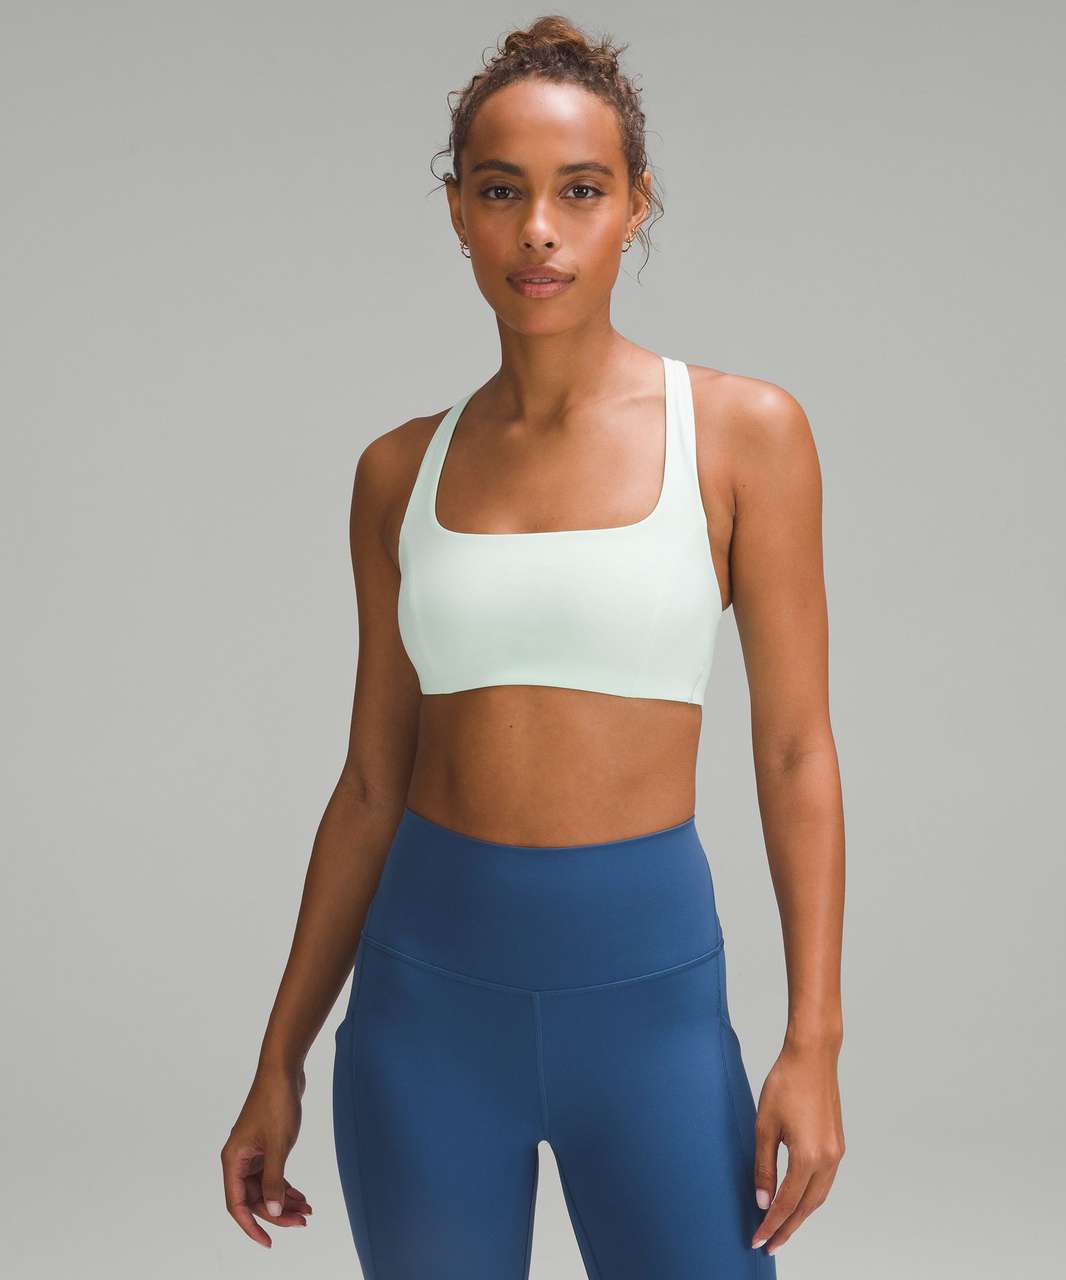 Lululemon SmoothCover Yoga Bra *Light Support, B/C Cup - Mint Moment